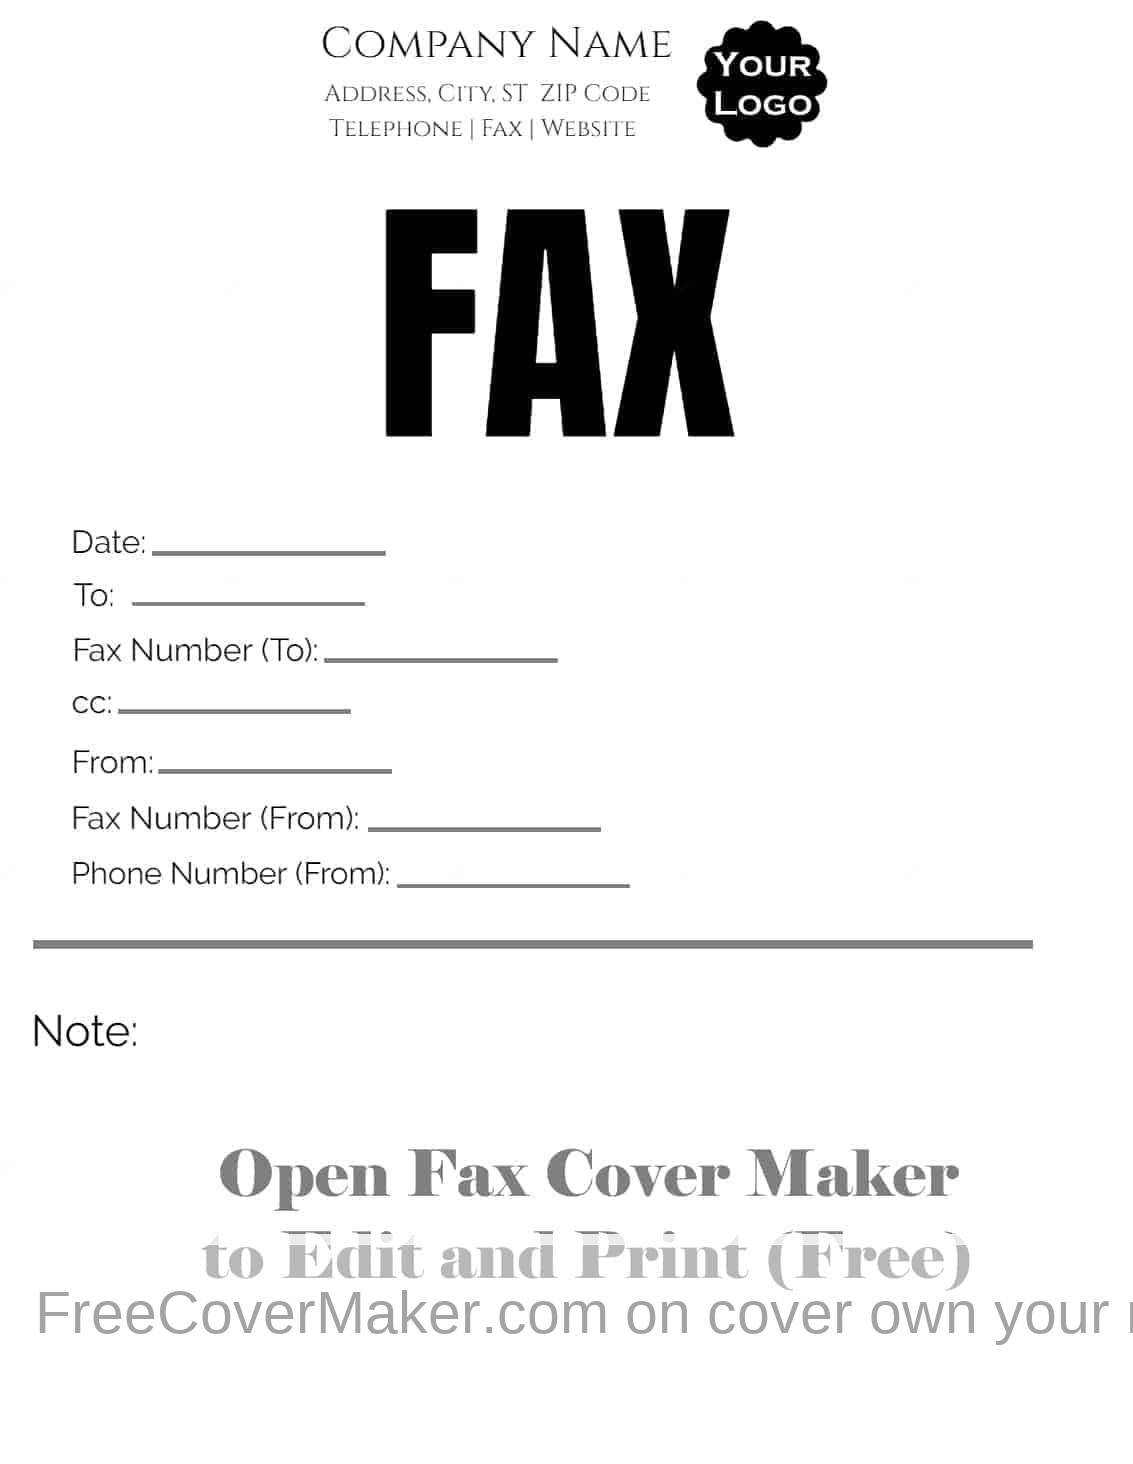 Free fax cover sheet Customize online then print